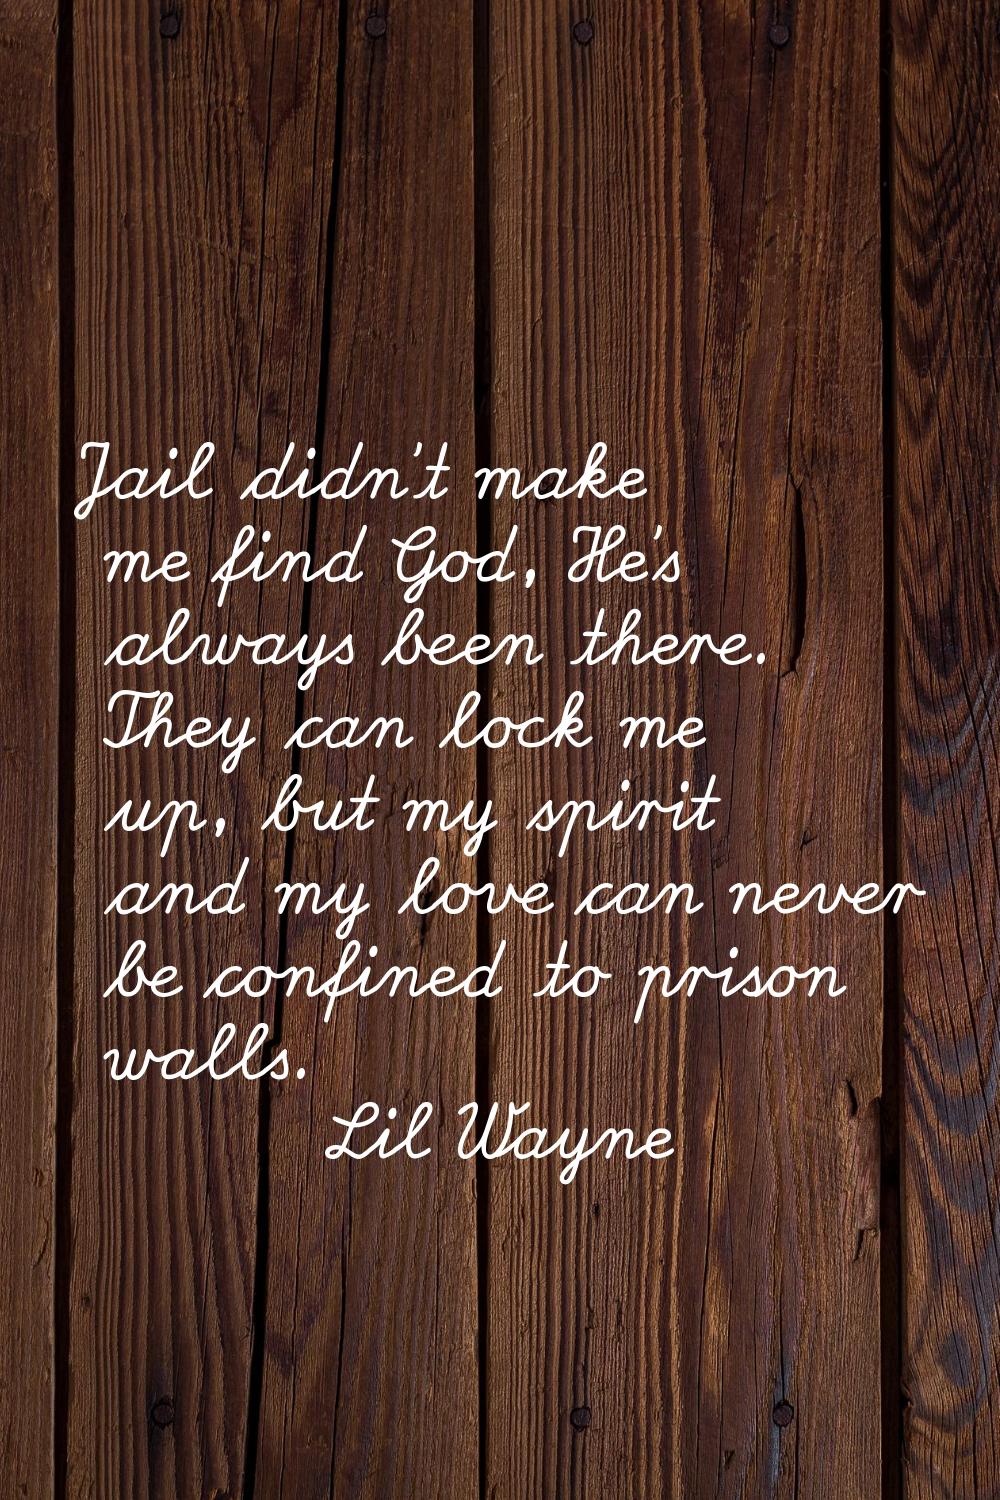 Jail didn't make me find God, He's always been there. They can lock me up, but my spirit and my lov